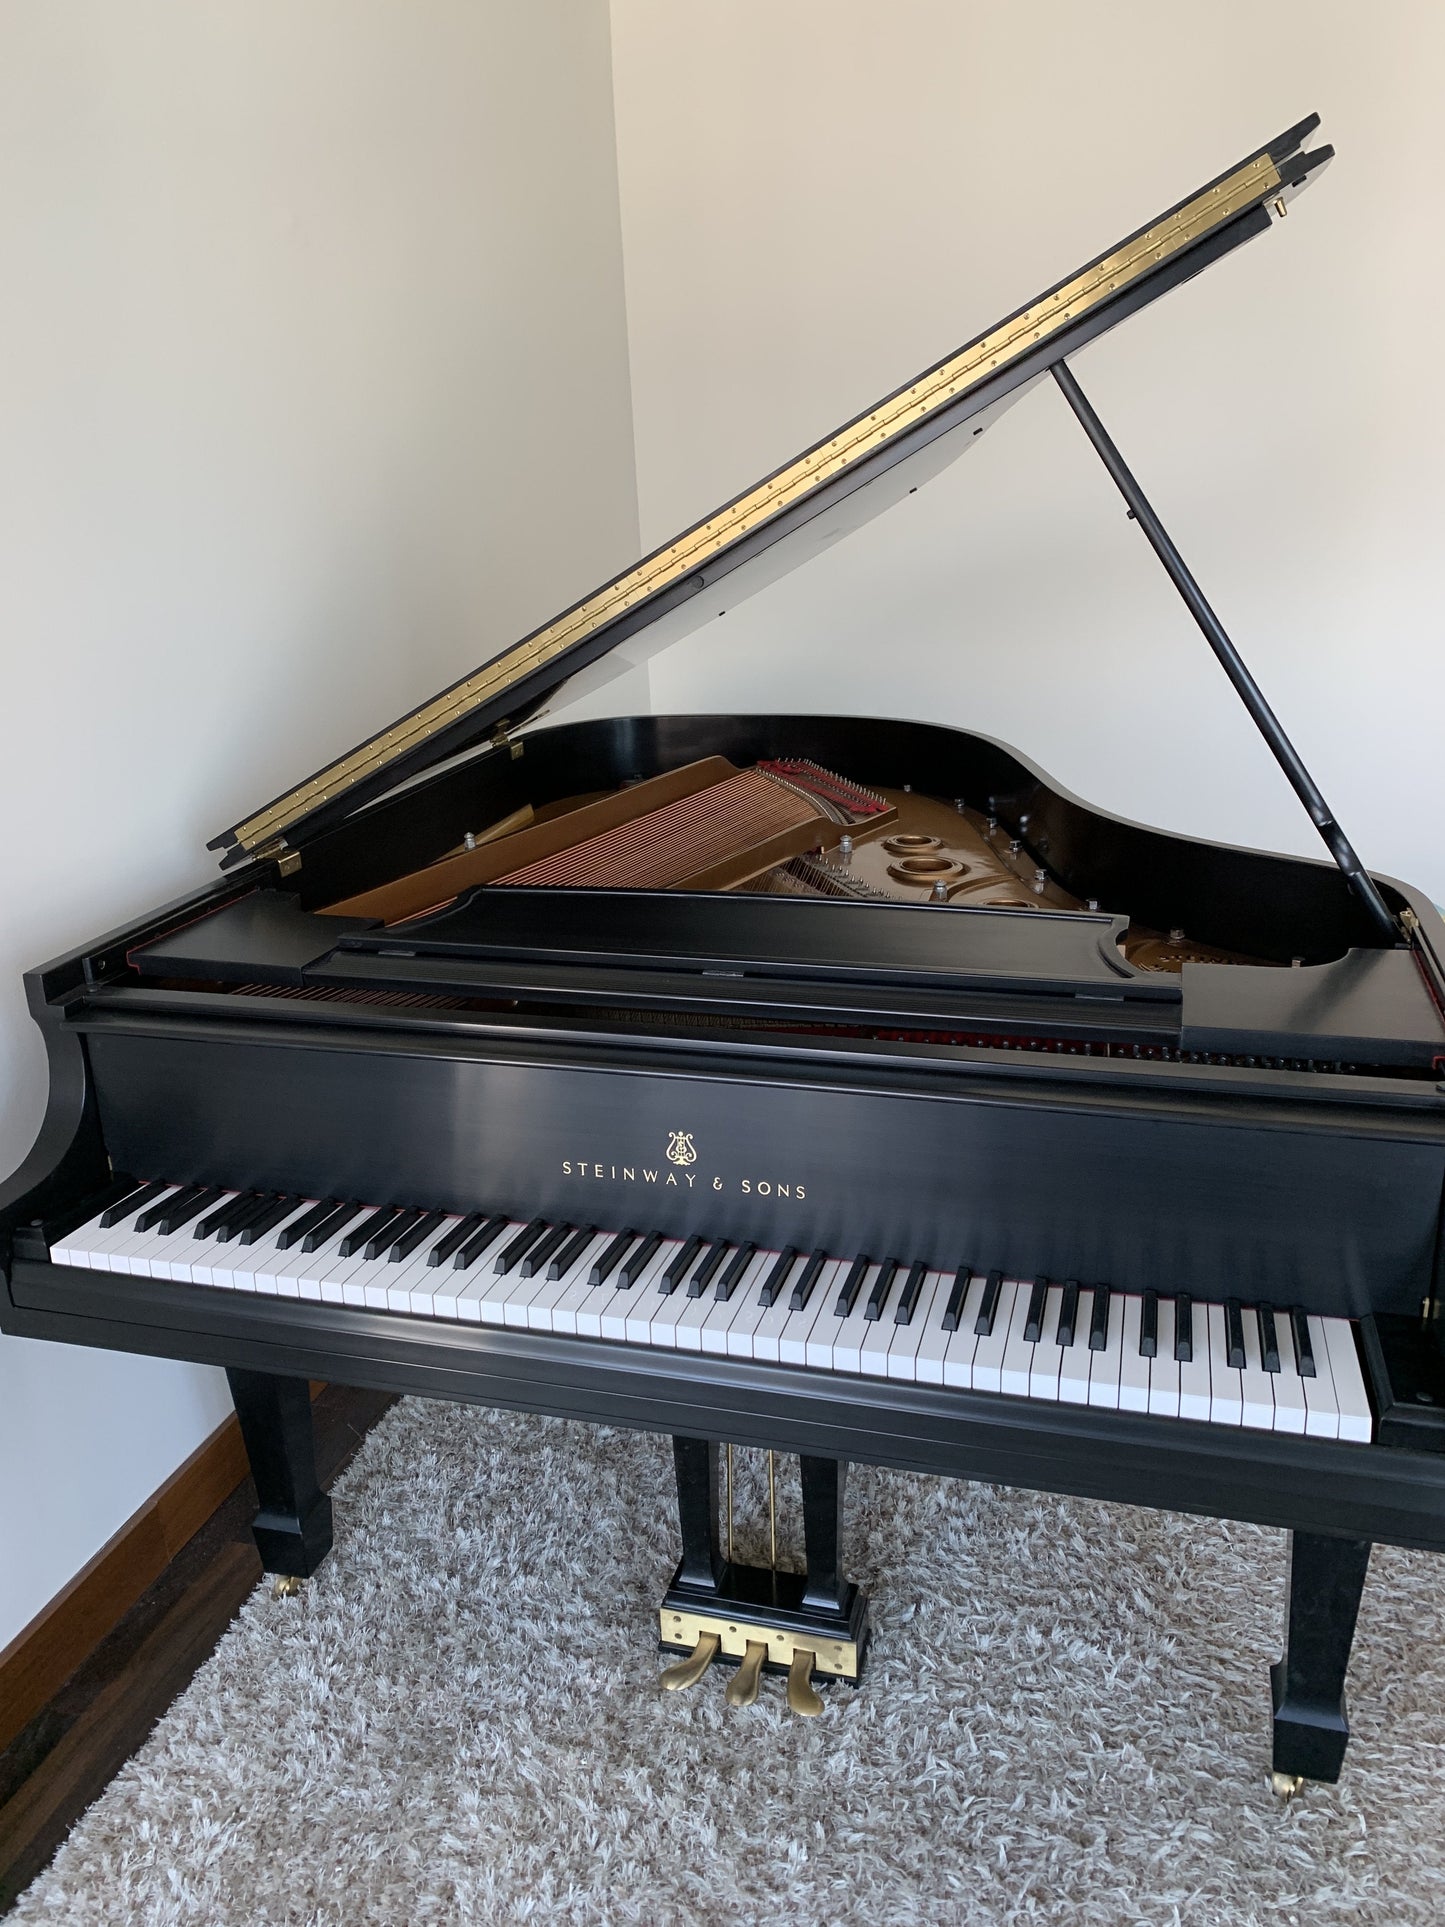 1988 Steinway Grand Piano Model L with Steinway Signature | Ebony